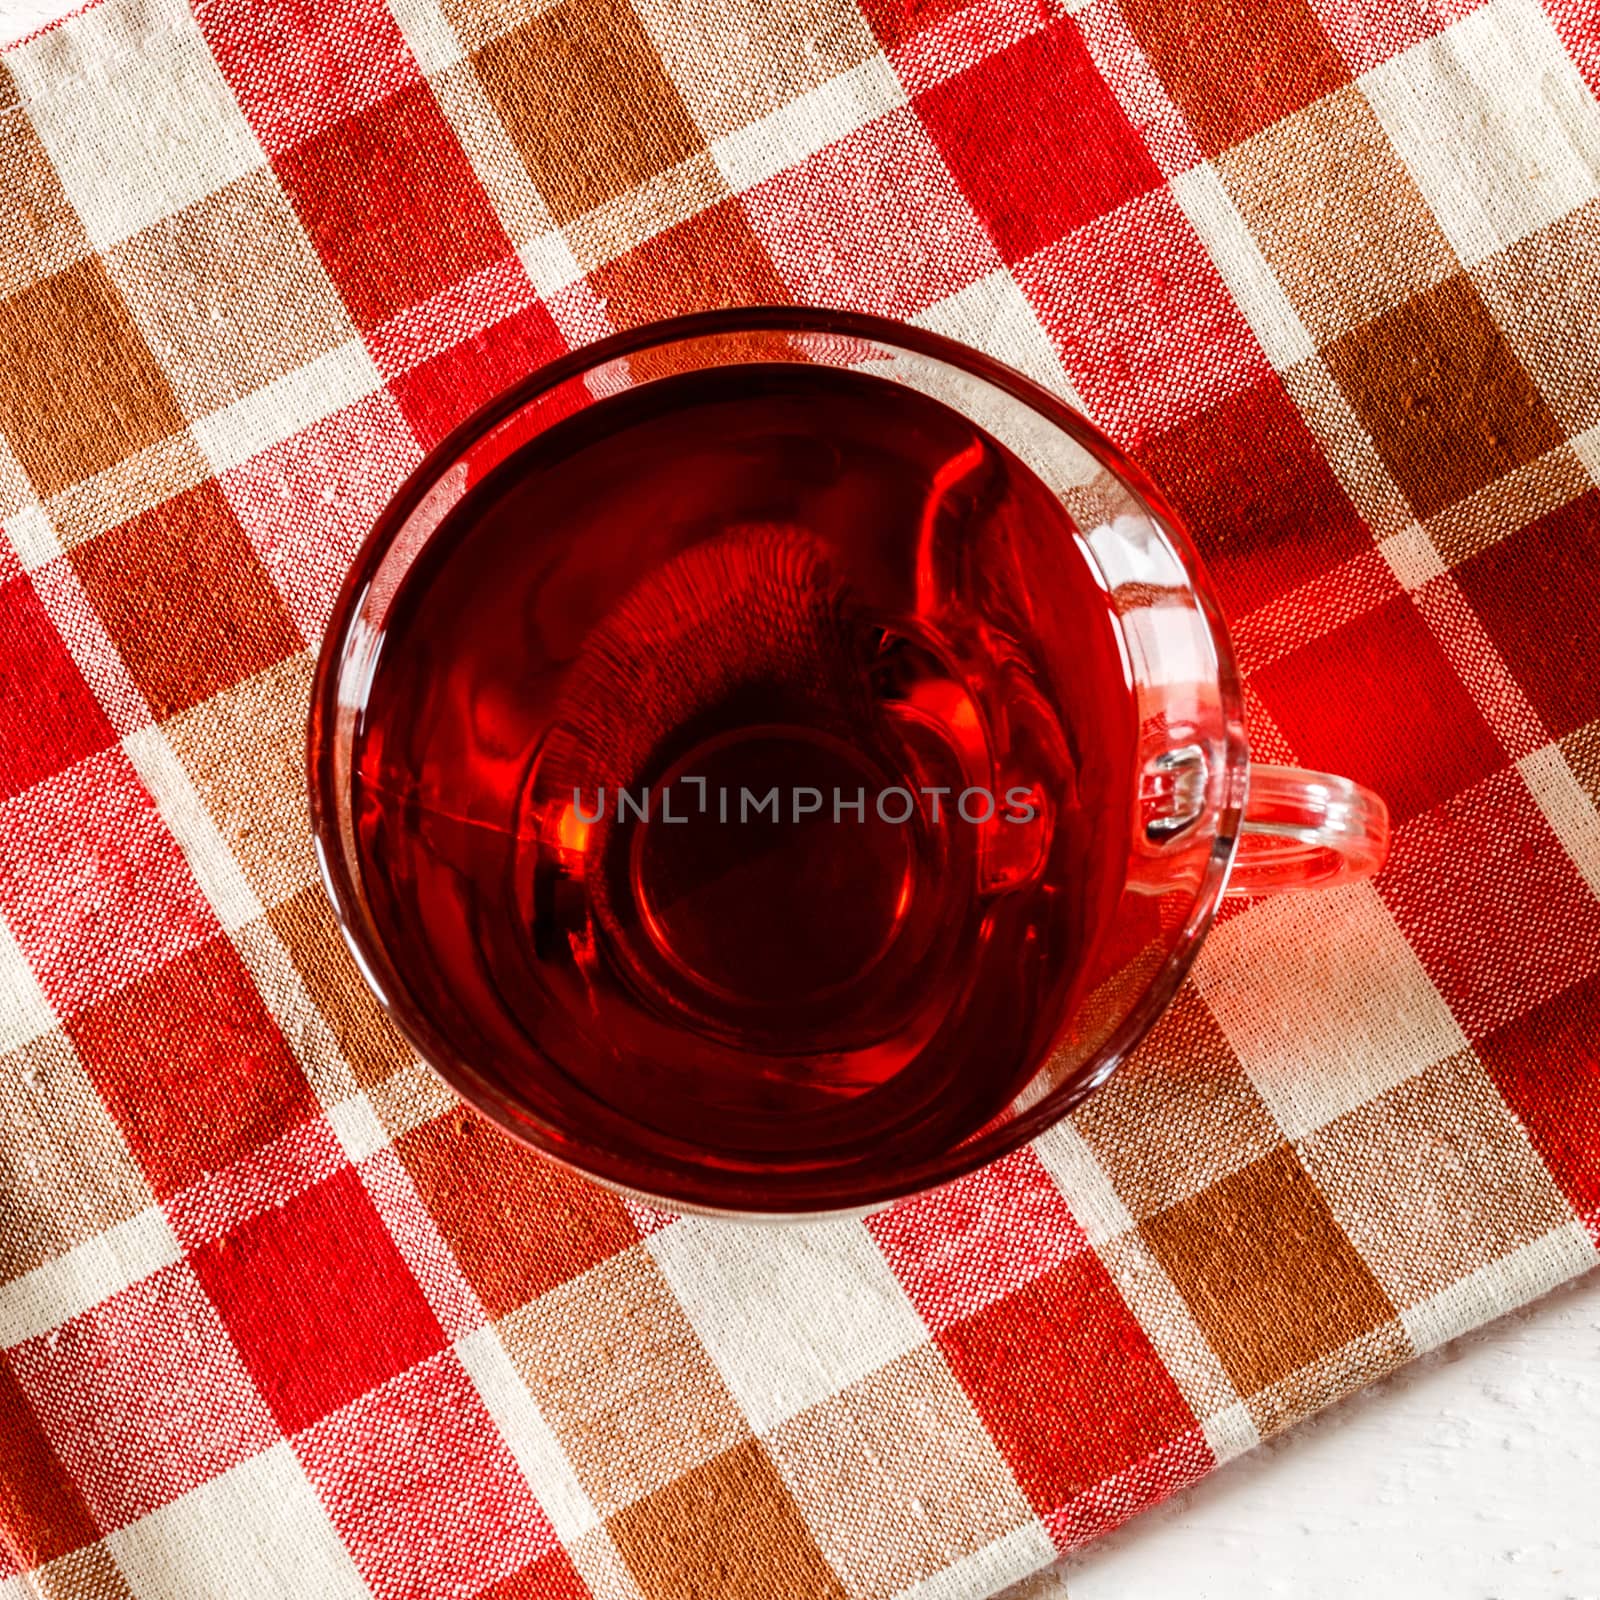 Cup of Karkadeh Red Tea on a white wooden table